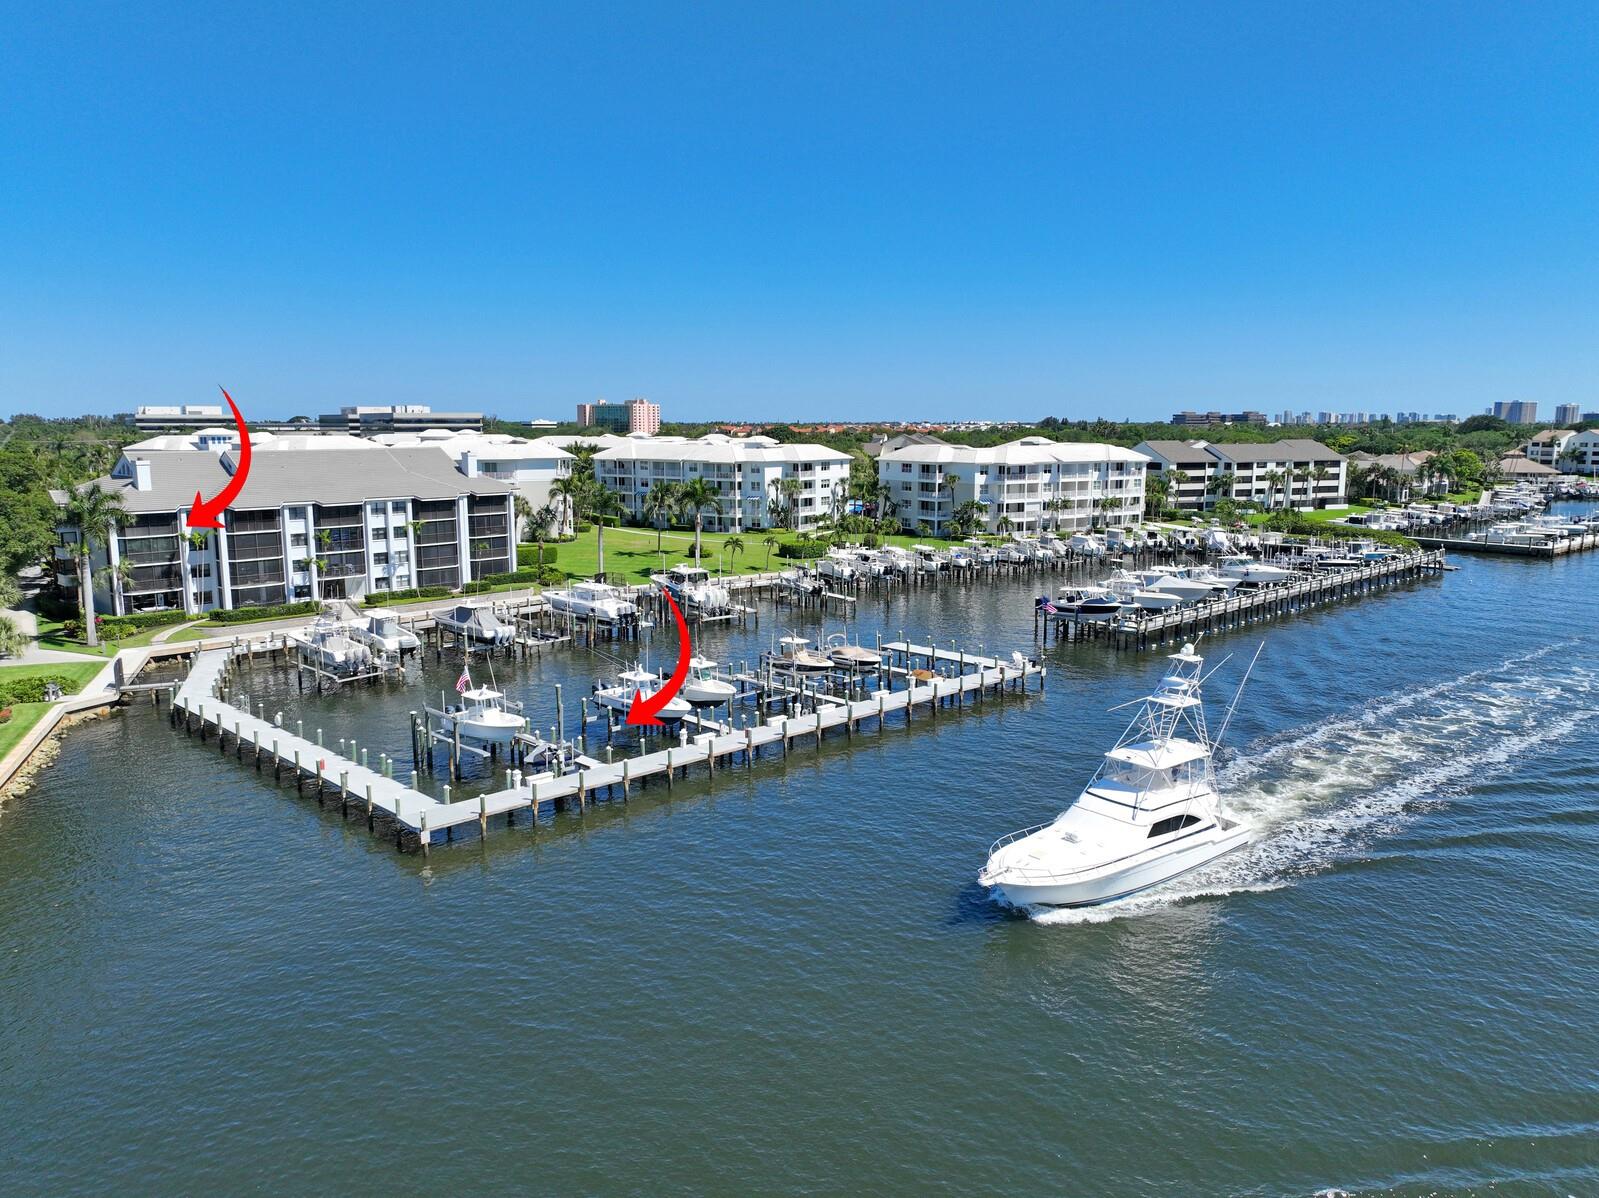 WATERFRONT with a "42 FT" BOAT SLIP! Welcome to this RARELY available top floor end unit at Bay Colony Condo, truly a hidden gem of Juno Beach! Featuring stunning unobstructed intracoastal/marina views, spacious & bright, this unit boasts 1,804 sq, ft. of living, plus a large 2nd floor loft space, & enclosed terrace with electric shades overlooking the water. Open kitchen w/Quartz countertops & Stainless Steel Appliances. Updated bathrooms & separate bar w/new wine fridge. One assigned parking space. This resort style waterfront community is complete with a newly renovated salt-water pool/spa & beautiful clubhouse. Brand NEW Tennis, Pickle Ball & Bocce Courts, & Fitness Center. This is a one-of-a-kind Boaters dream & waterfront oasis, only 2 minutes from Juno Beach & Downtown Gardens!